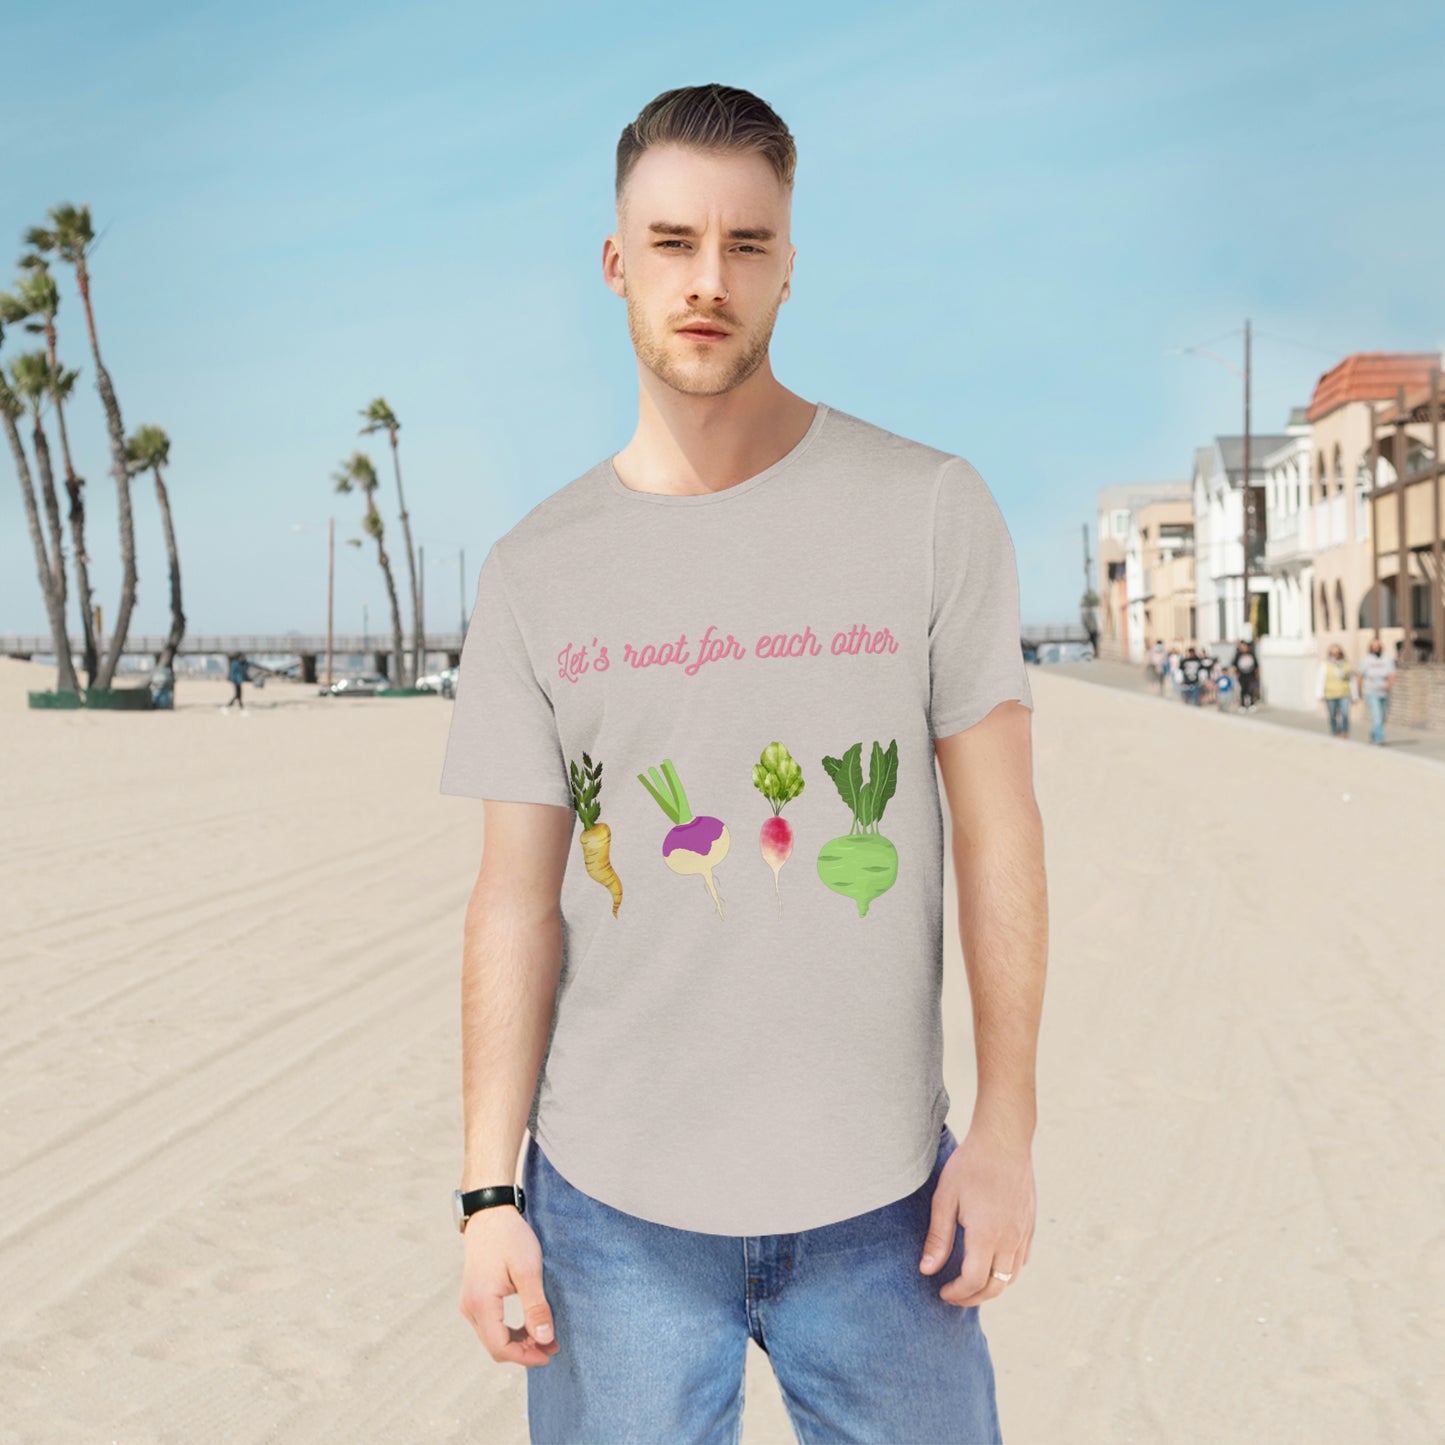 A Roots Shirt Unleash Your Green Thumb and Show Your Support with Konaloo's 'Let's Root for Each Other' Gardening T-Shirt - Available in Unisex Relaxed Jersey Design for Men and Women!